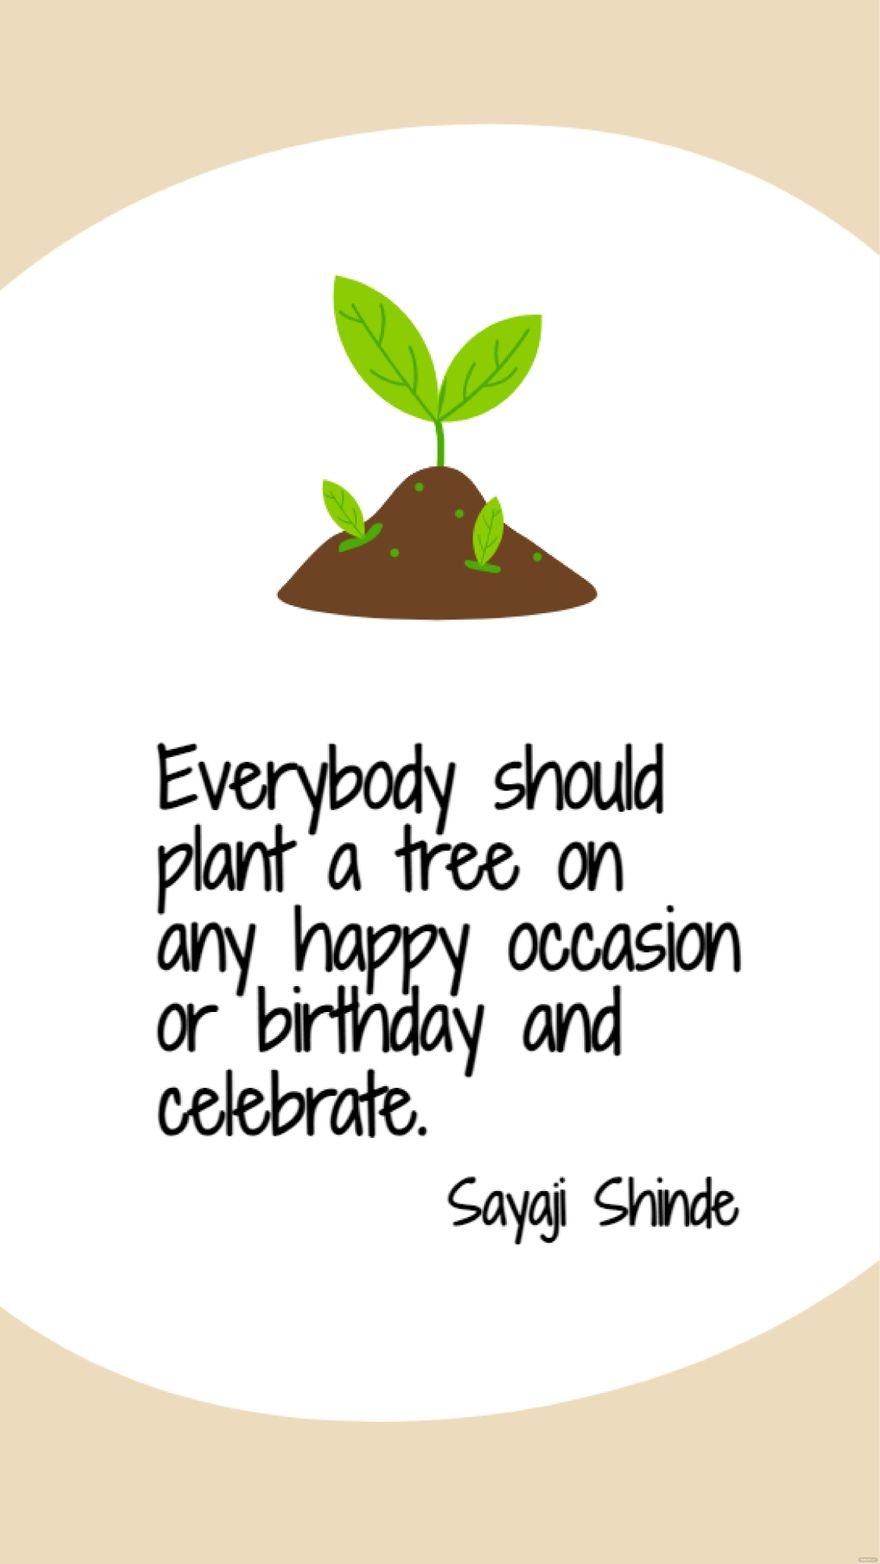 Sayaji Shinde - Everybody should plant a tree on any happy occasion or birthday and celebrate.